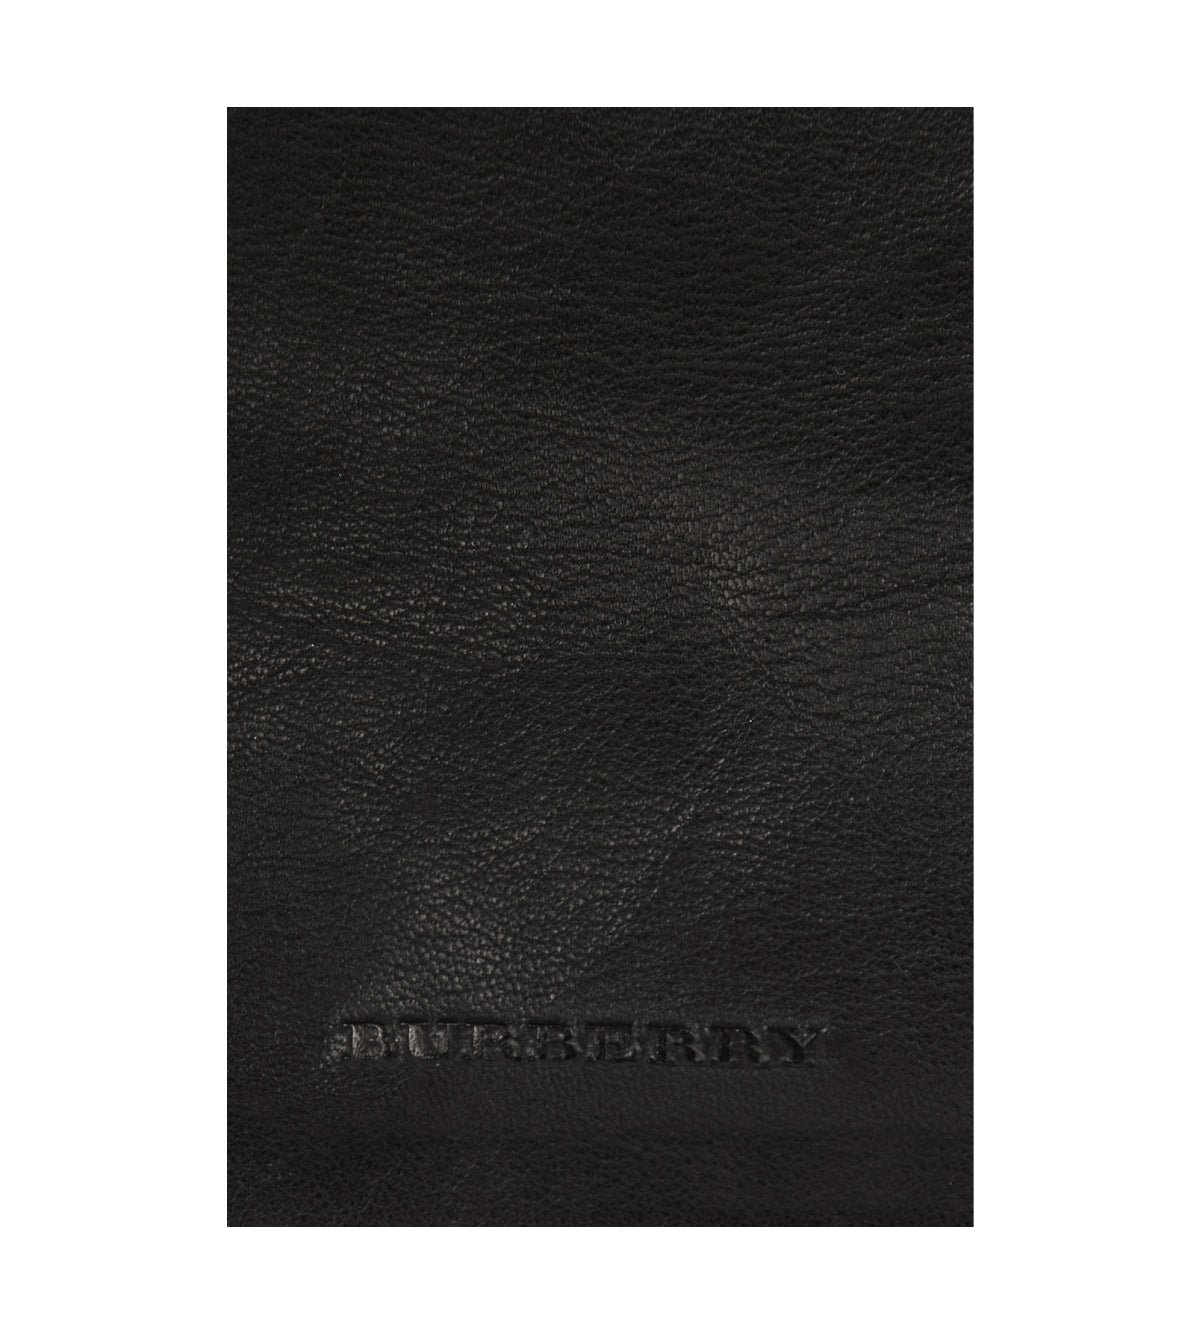 Burberry-OUTLET-SALE-Embossed Logo Leather Gloves-ARCHIVIST